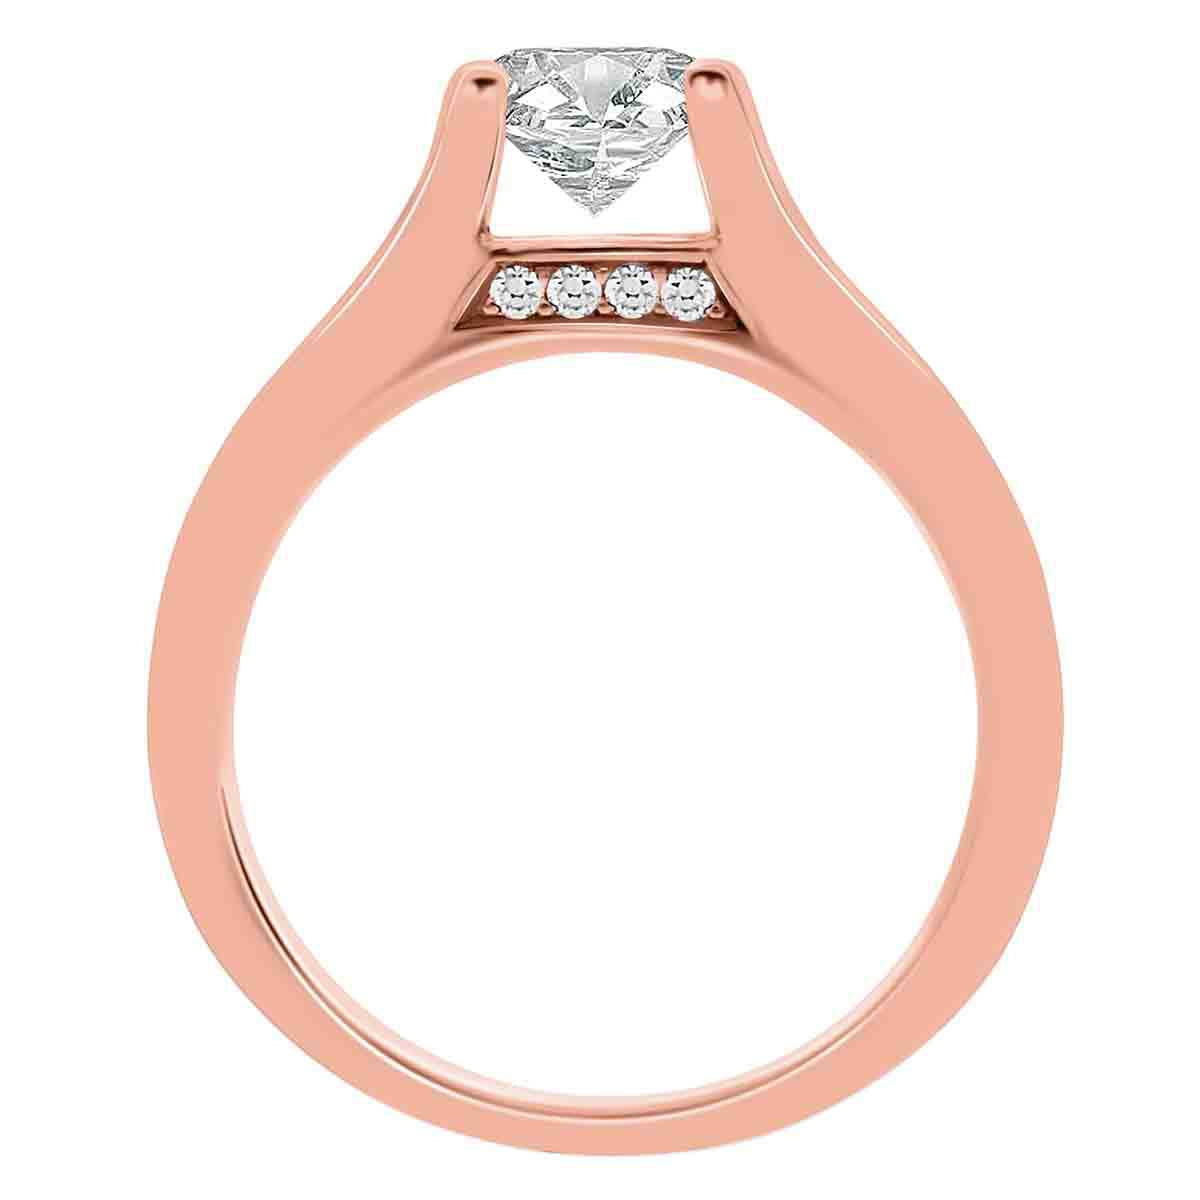 Channel Set Diamond Ring set in rose gold standing upright